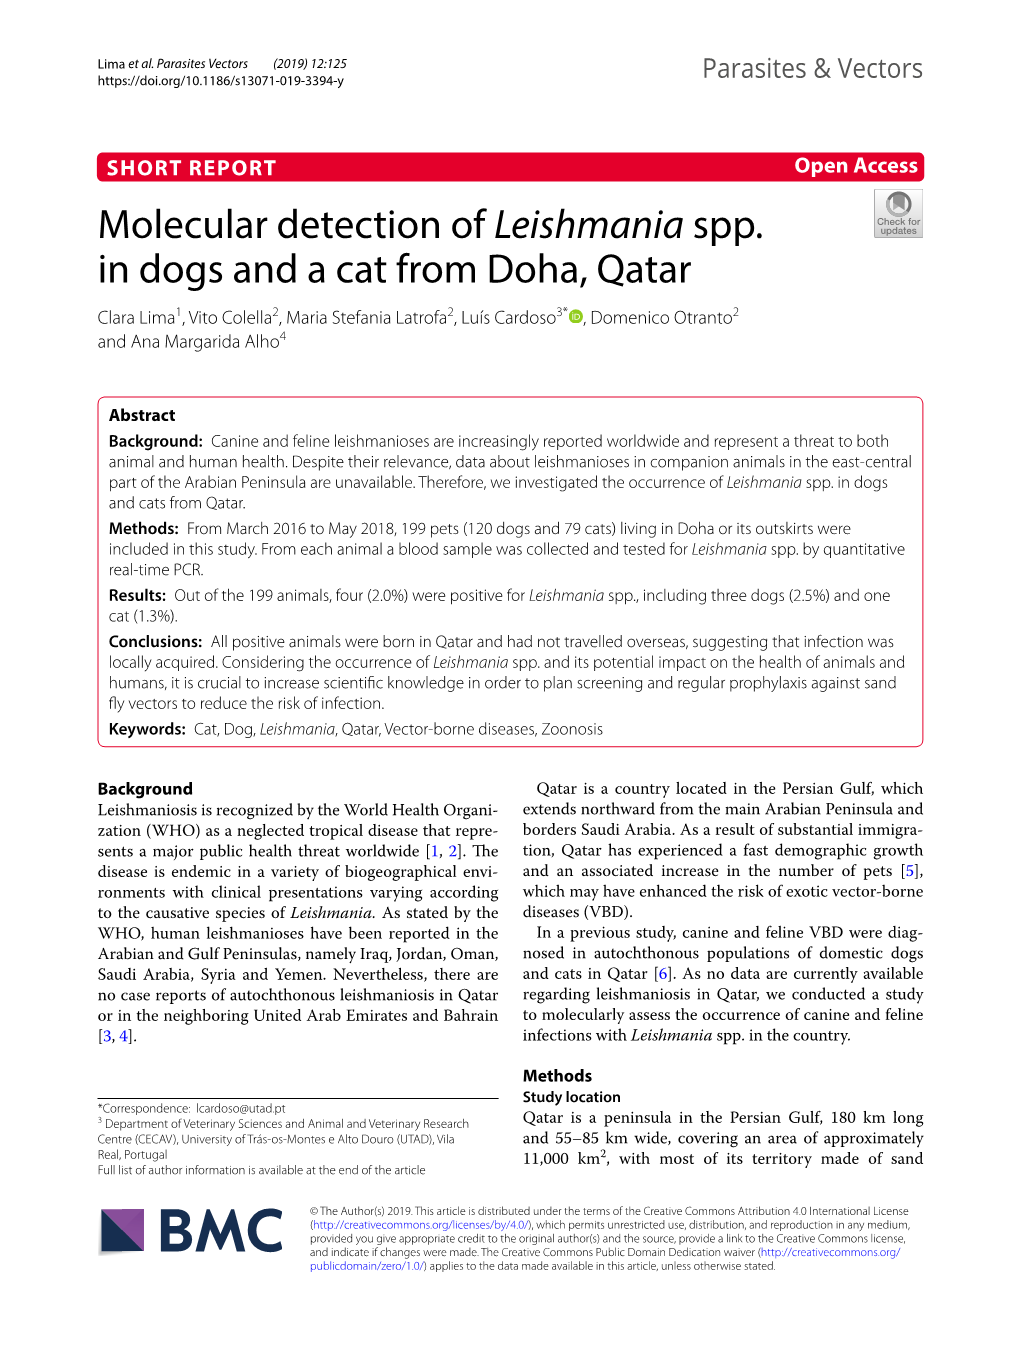 Molecular Detection of Leishmania Spp. in Dogs and a Cat from Doha